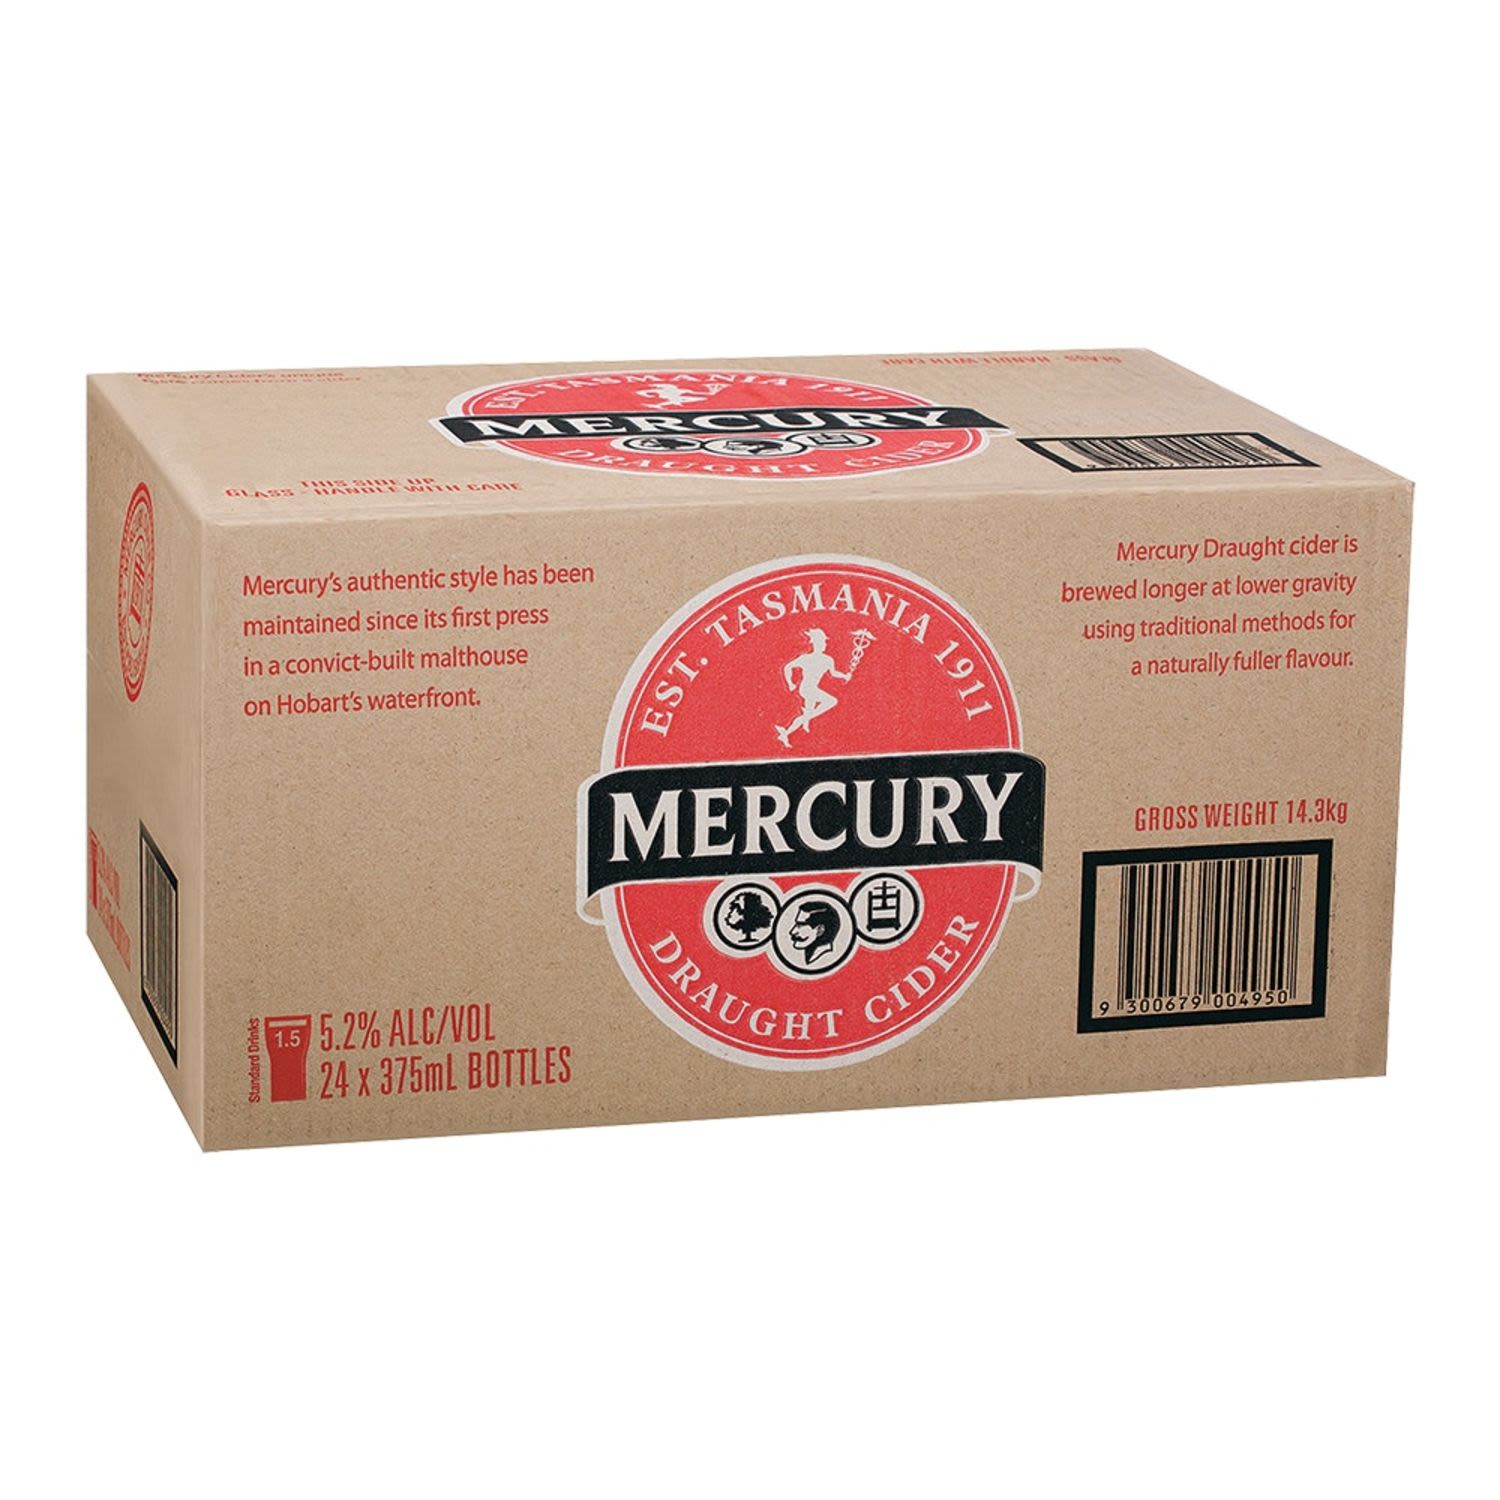 Made in Tasmania, Mercury Draught Cider is the perfect balance of a sweet apple and the cleansing acidity. A great all round Cider.<br /> <br />Alcohol Volume: 5.20%<br /><br />Pack Format: 24 Pack<br /><br />Standard Drinks: 1.5</br /><br />Pack Type: Bottle<br /><br />Country of Origin: Australia<br />